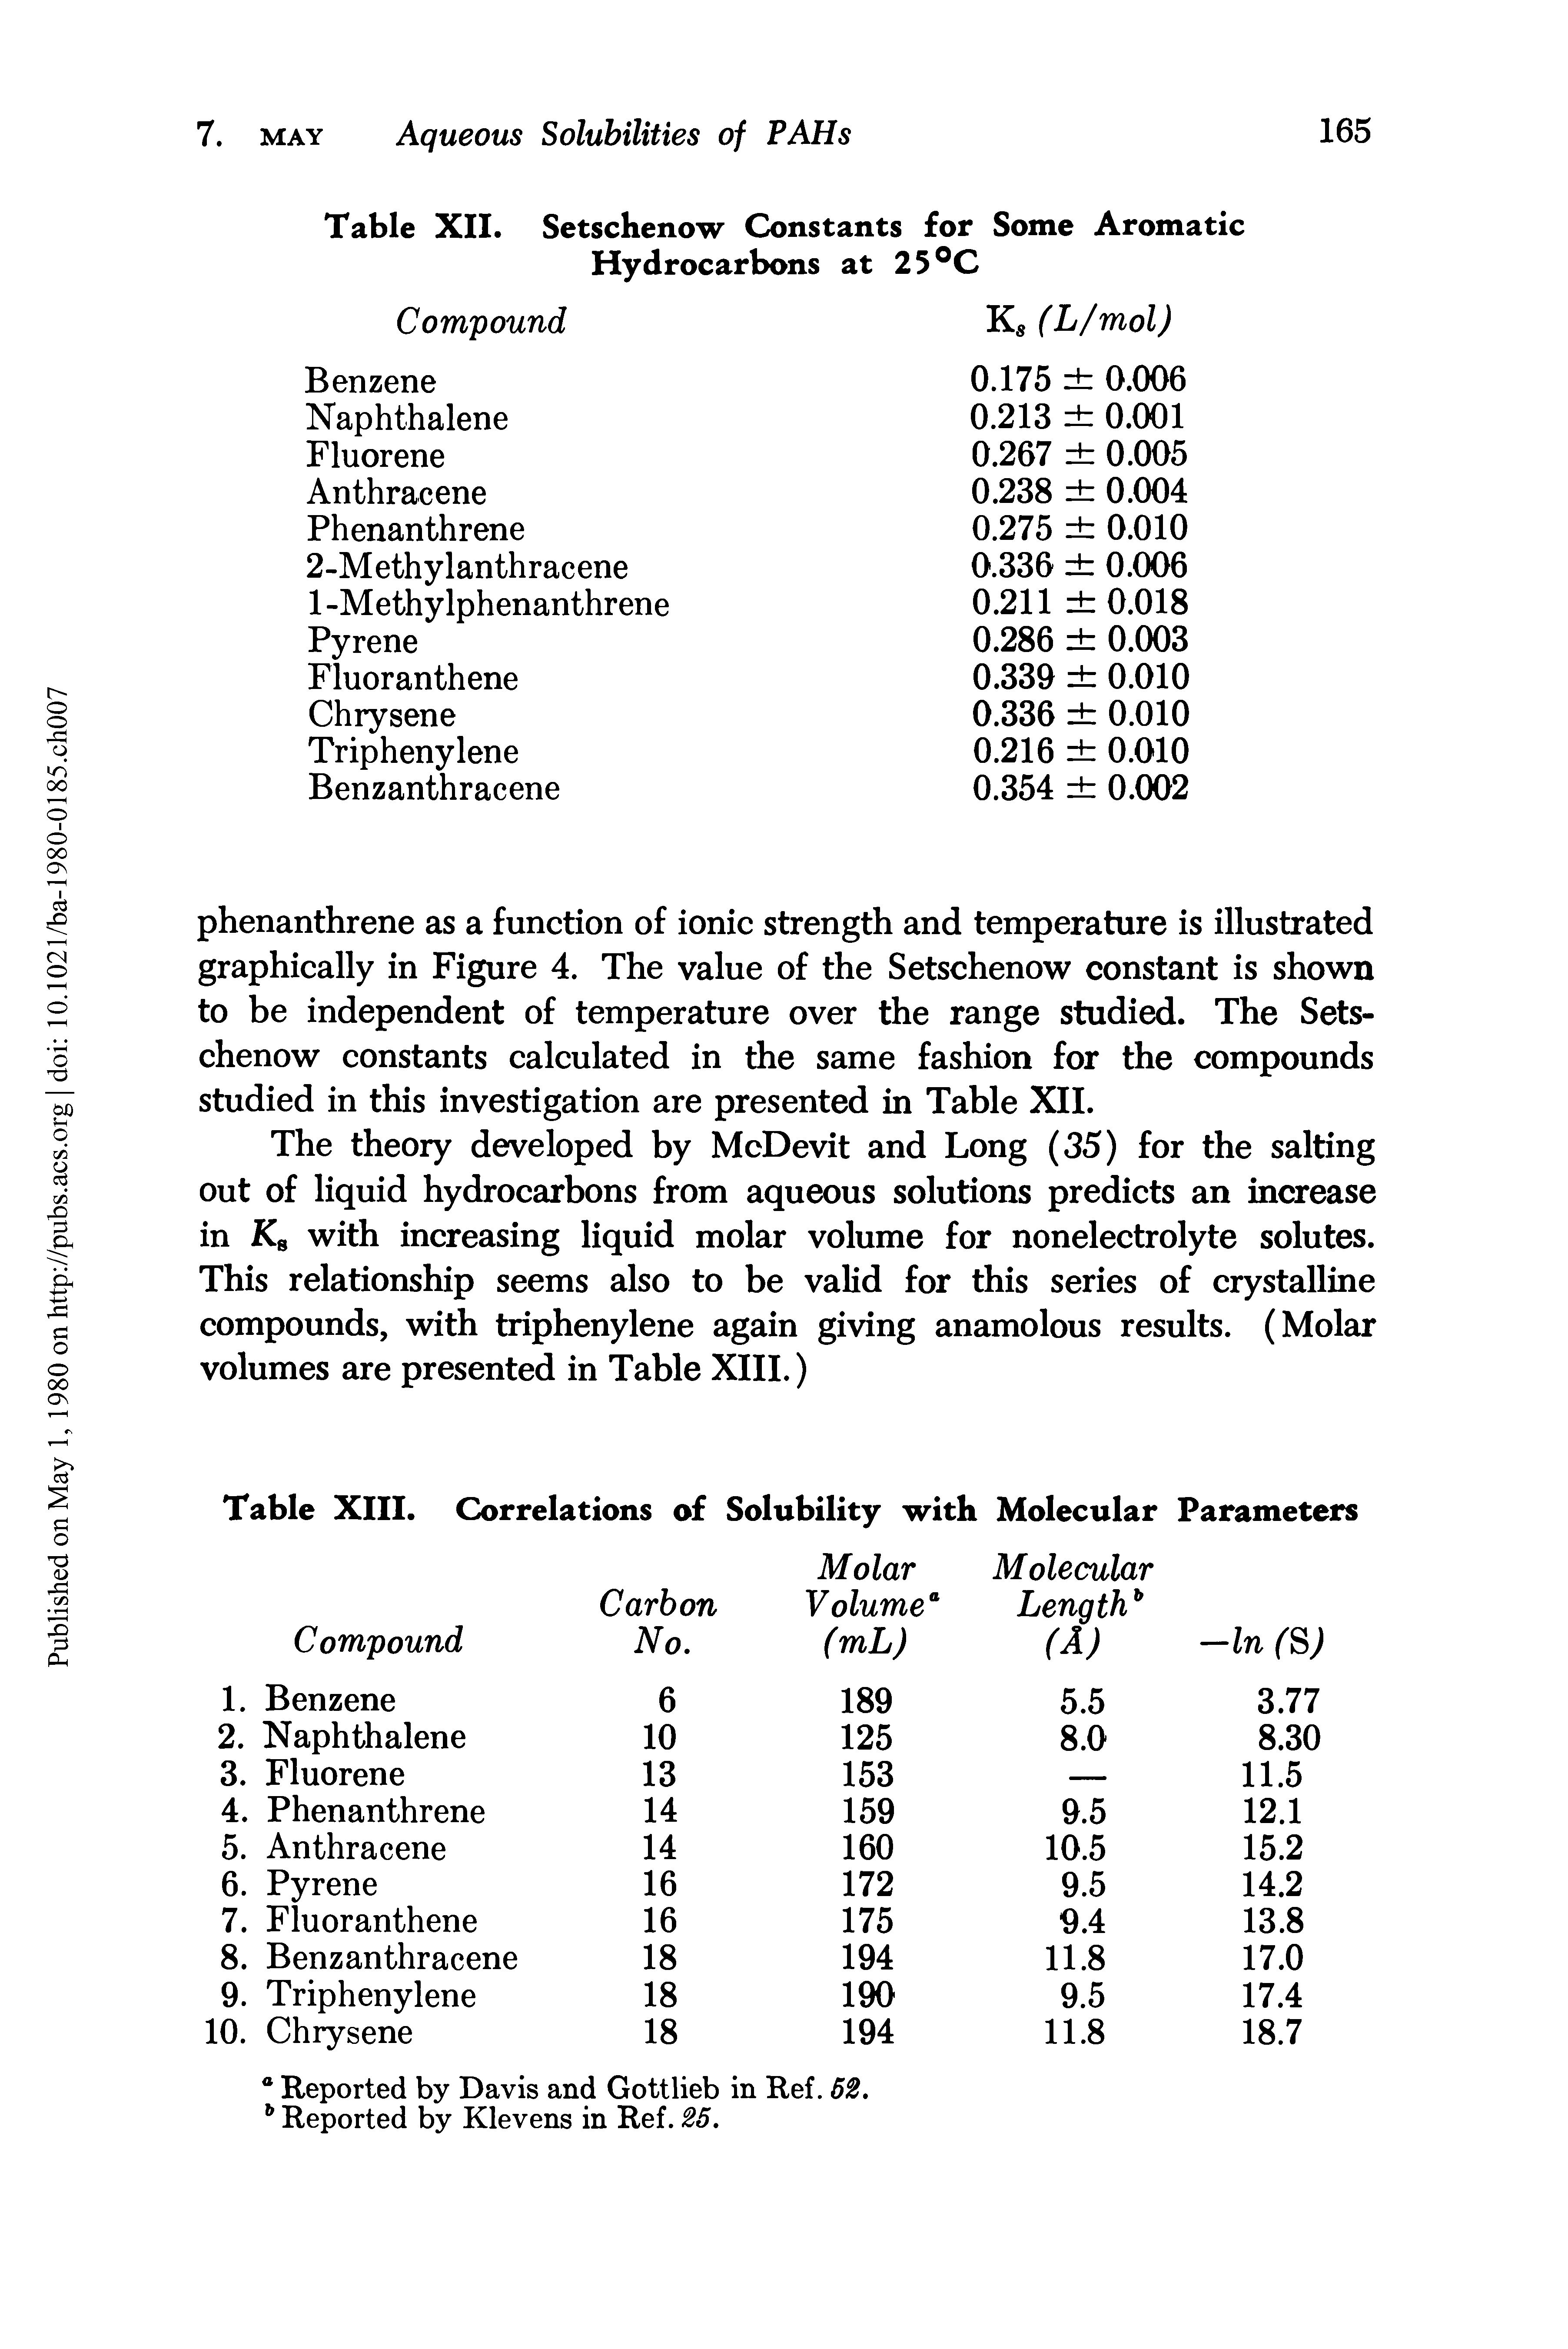 Table XII. Setschenow Constants for Some Aromatic Hydrocarbons at 25°C...